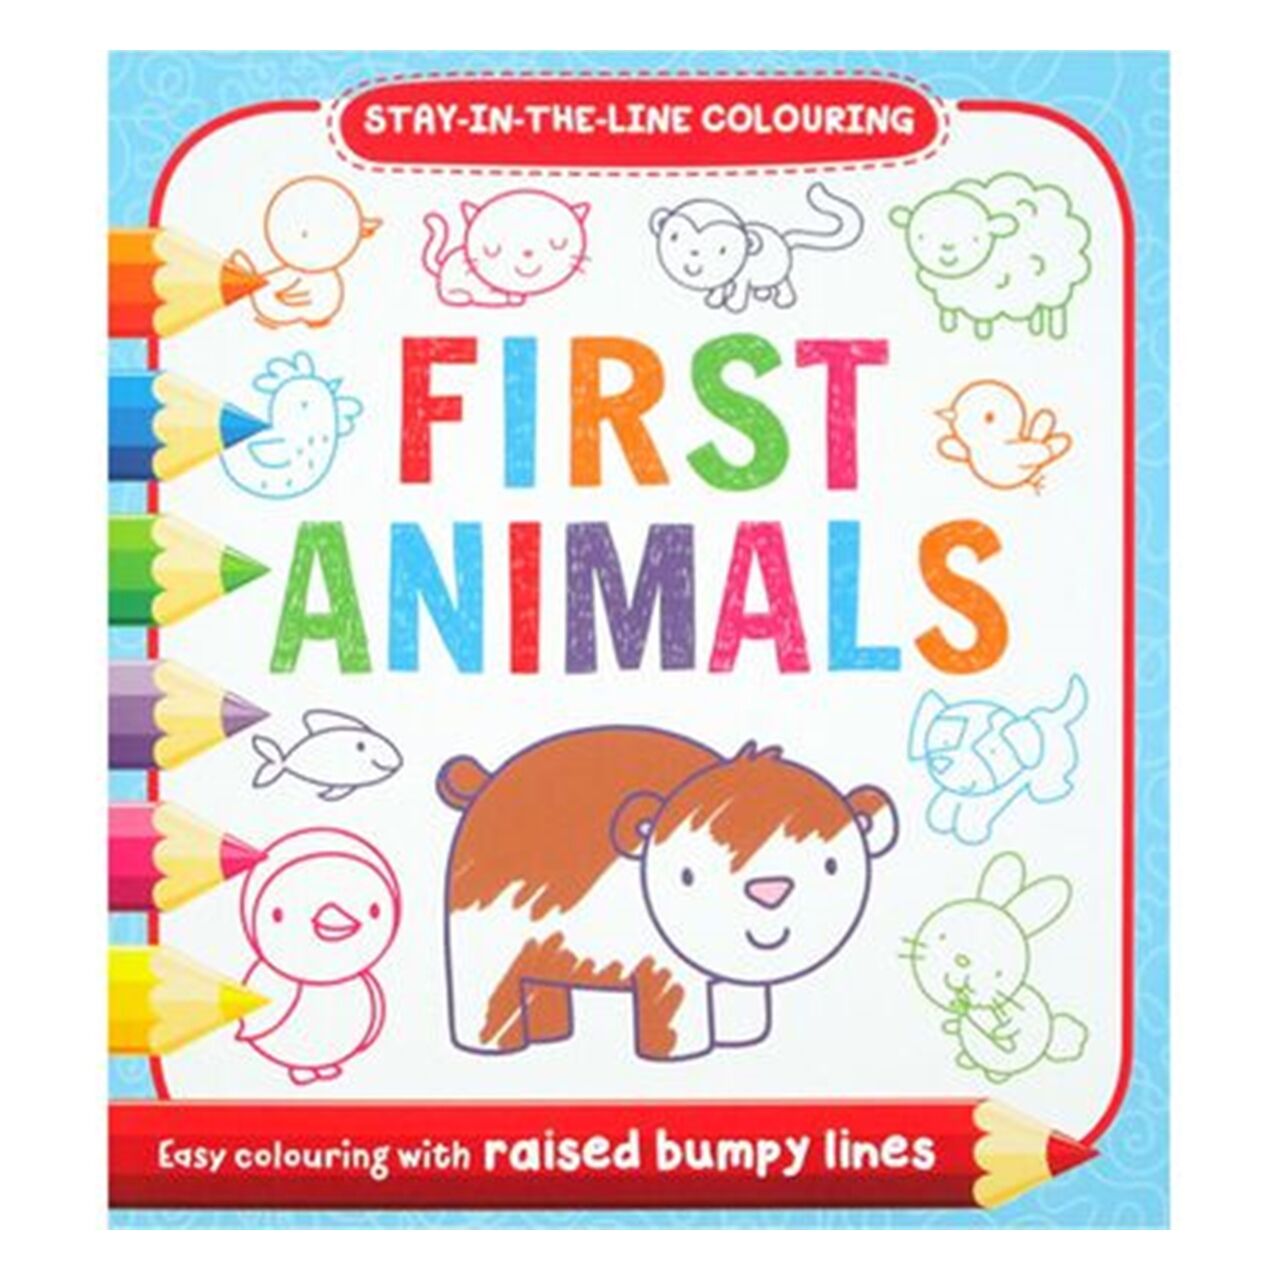 Stay In Line Colouring - First Animals